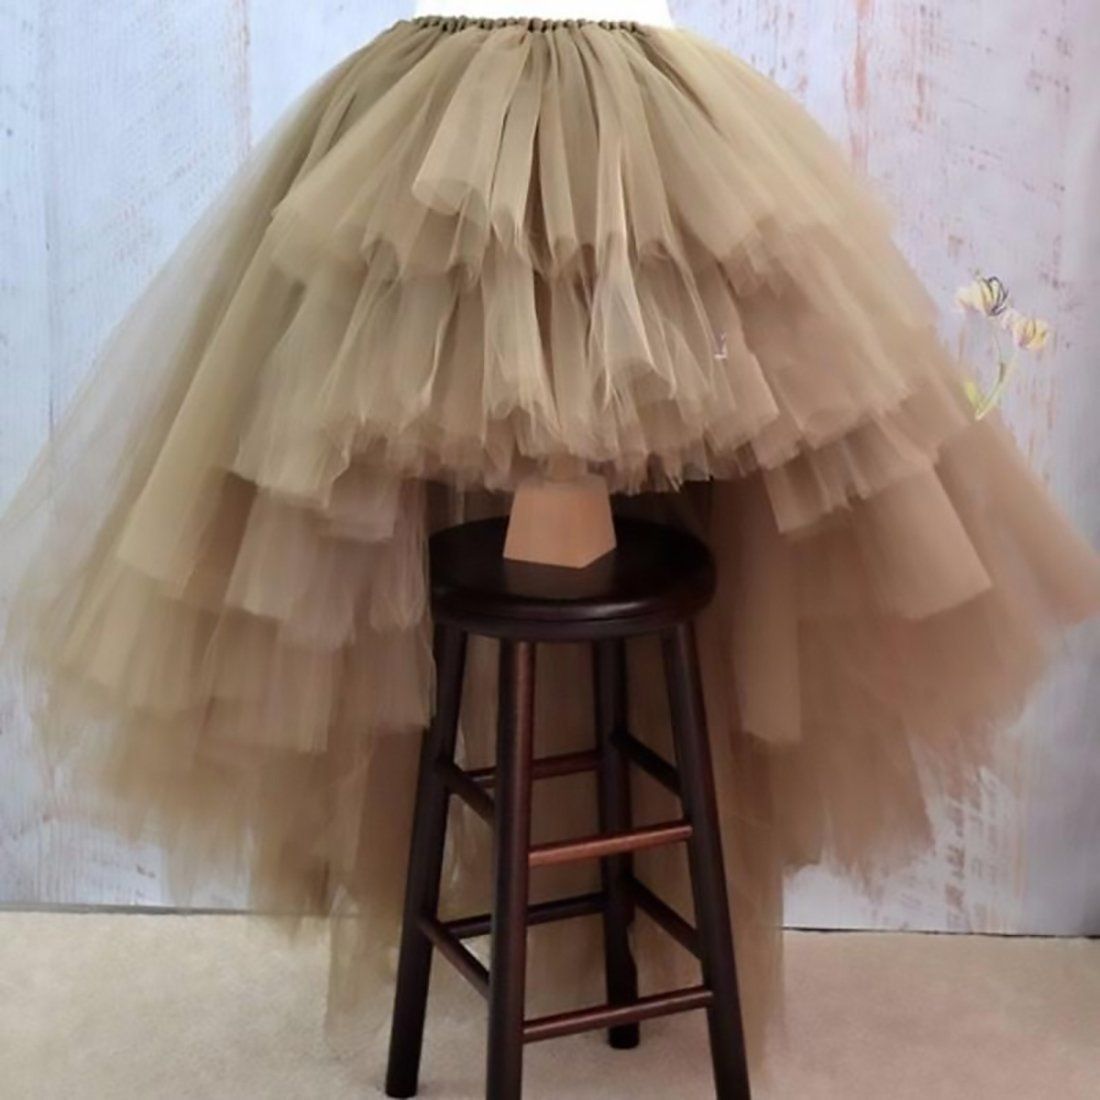 Women's Skirt Tiered Layers Tulle Personalized Puffy Asymmetrical Real Photo Women's Skirt Tiered Layers Tulle Personalized Puffy Asymmetrical Real Photo -   16 tulle dress DIY ideas